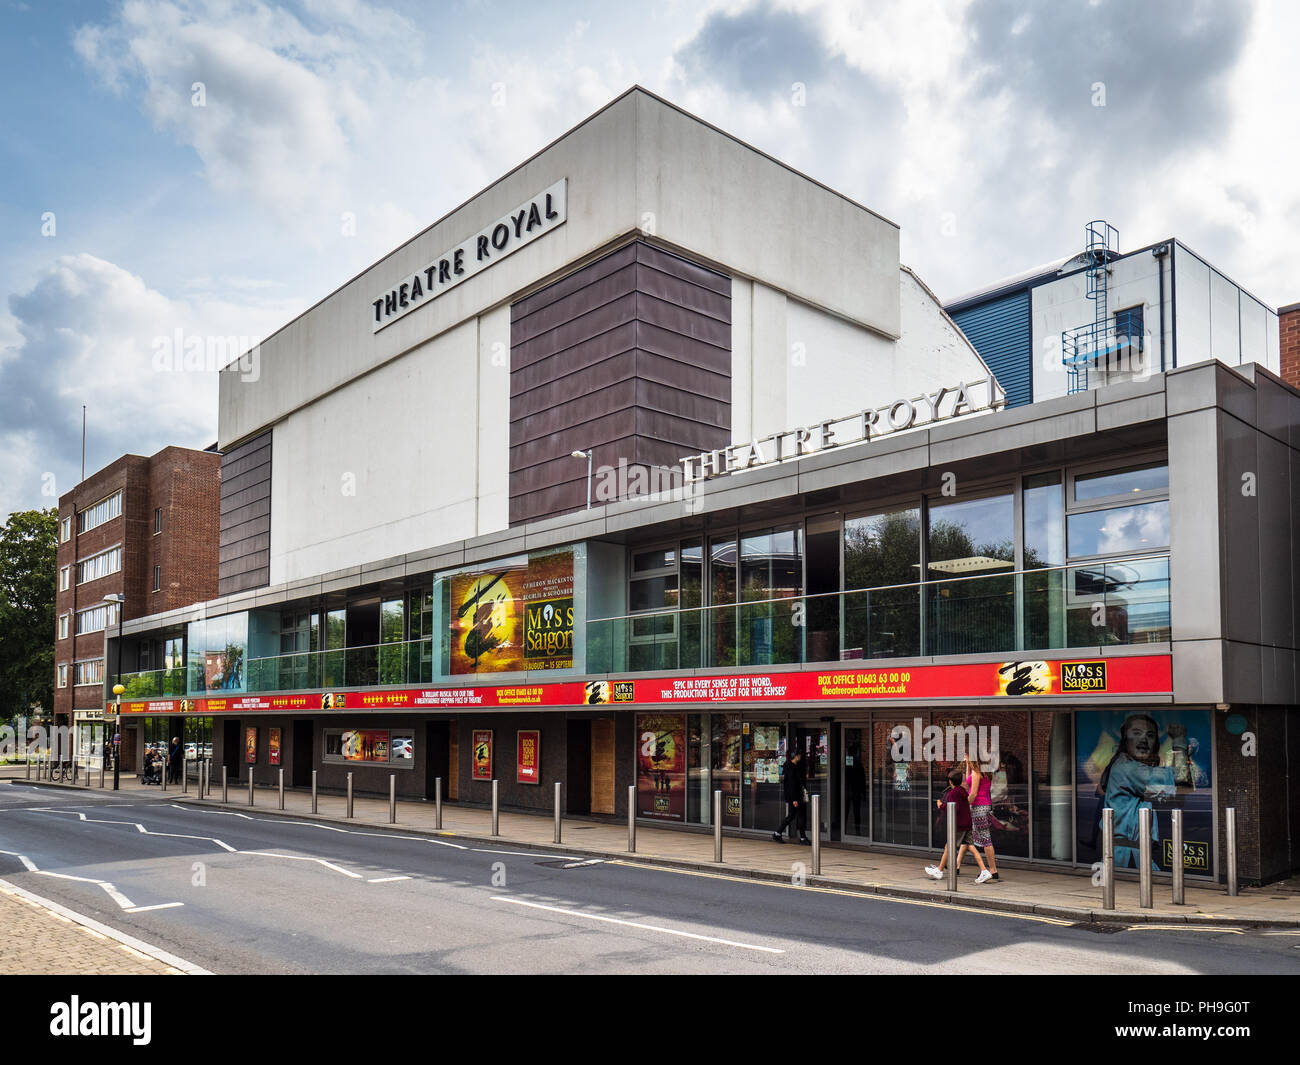 Norwich Theatre Royal - Theatre Royal Norwich - an Art-Deco theatre rebuilt 1935 after a fire, refurbished in 2007 by Tim Foster Architects Stock Photo